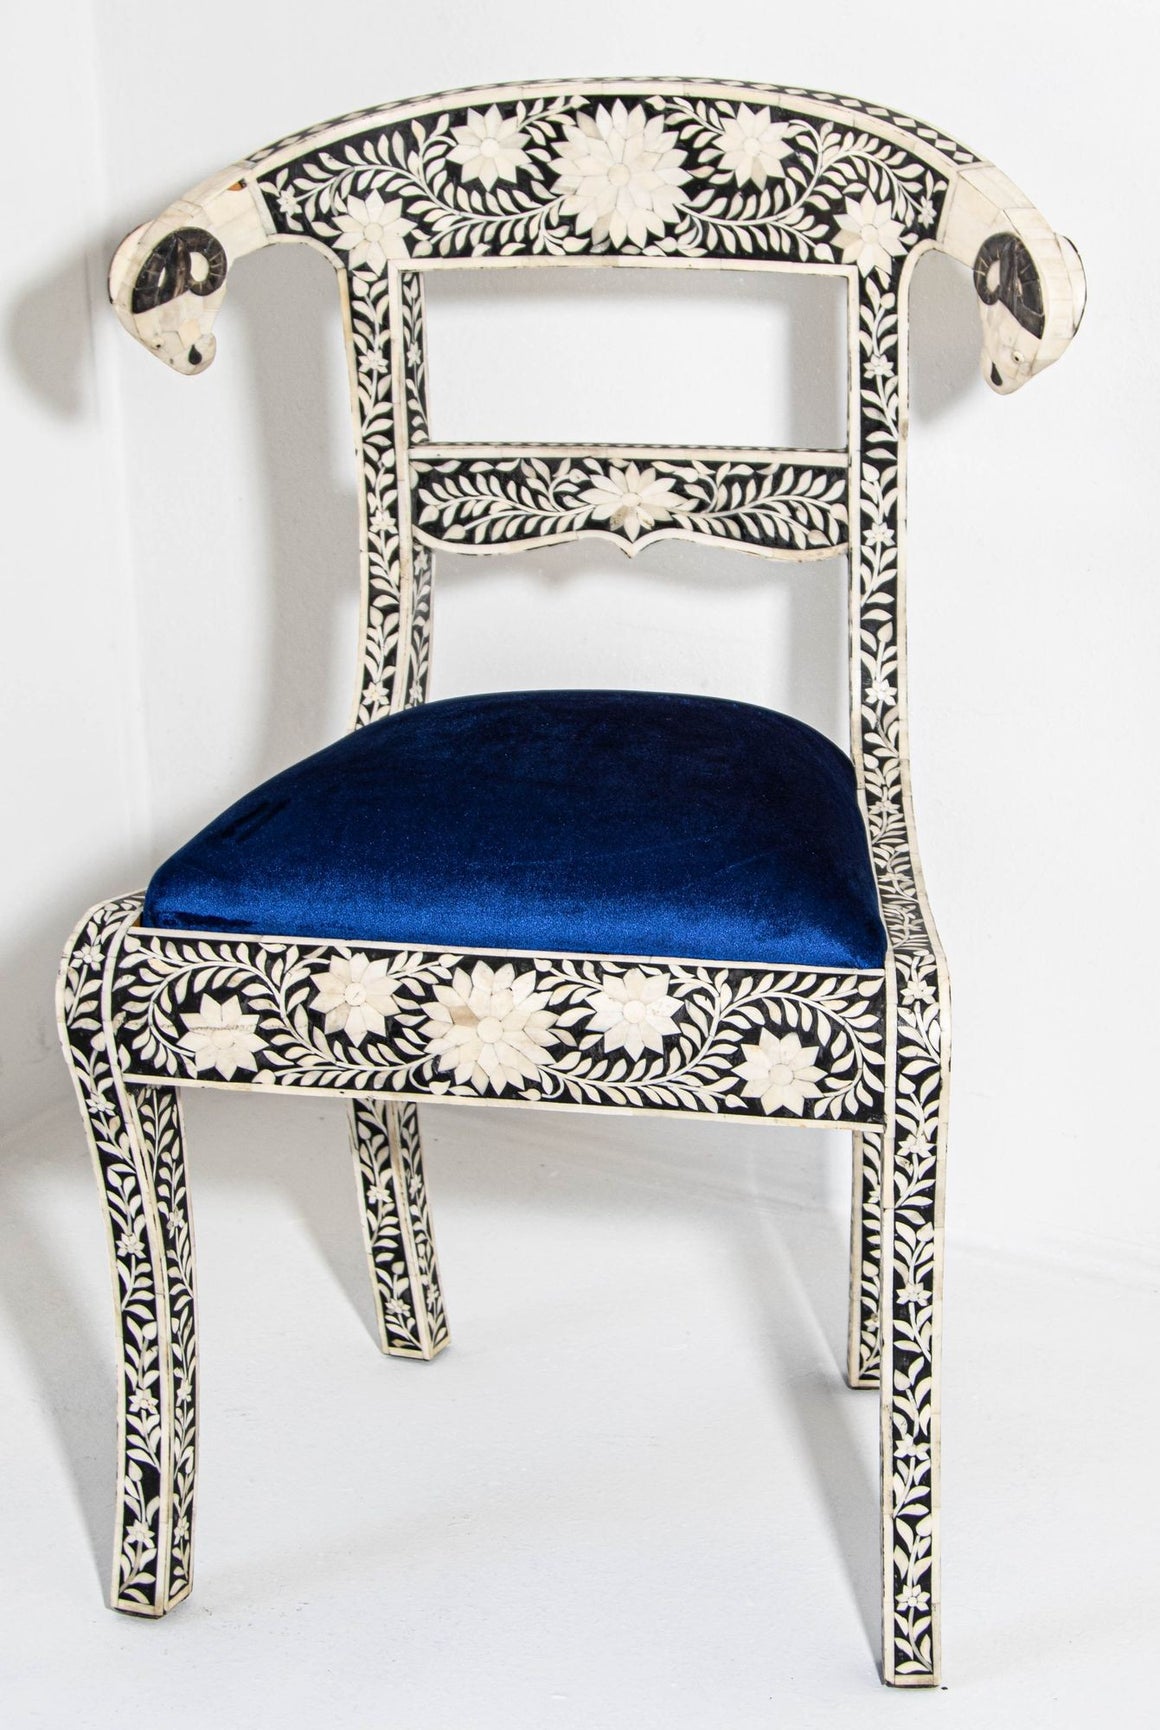 Antique Anglo-Indian Side Chair with Ram's Head Bone Inlaid Royal Blue Seat